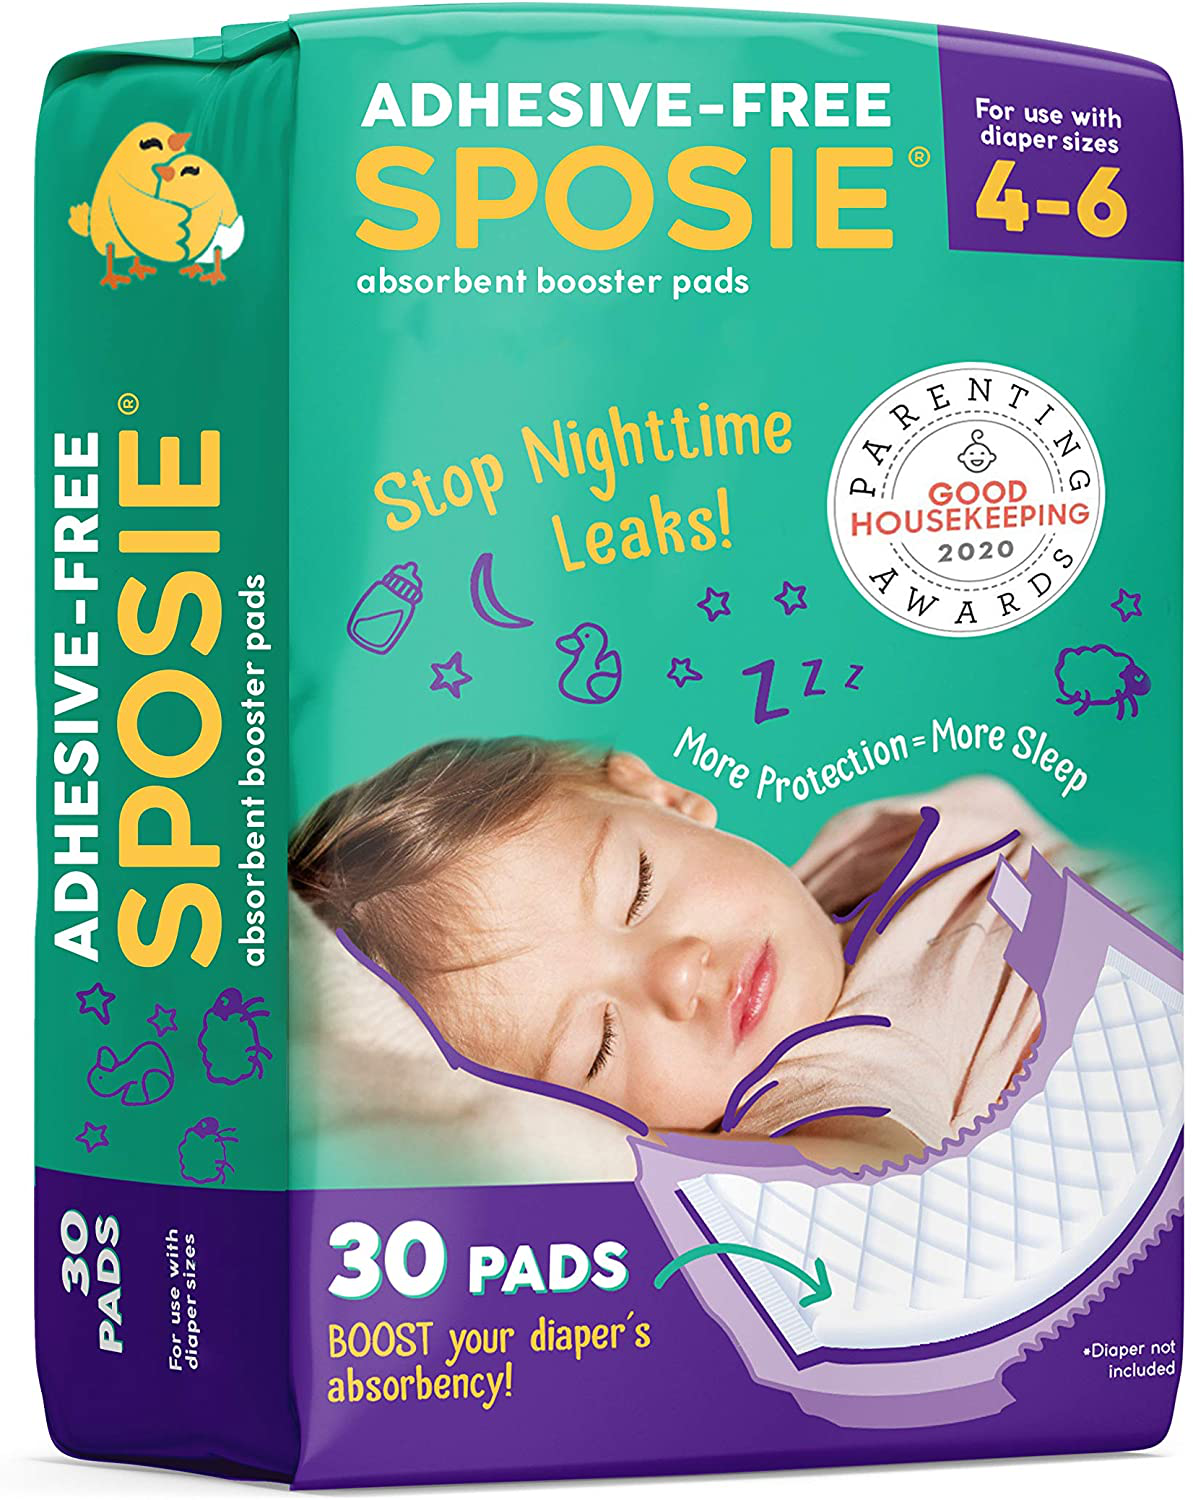 Sposie, Stop Nighttime Diaper Leaks, Extra Overnight Protection for Bedwetting and Potty Training, Fits Diaper Sizes 4-6, 30 Ct., Adhesive Free